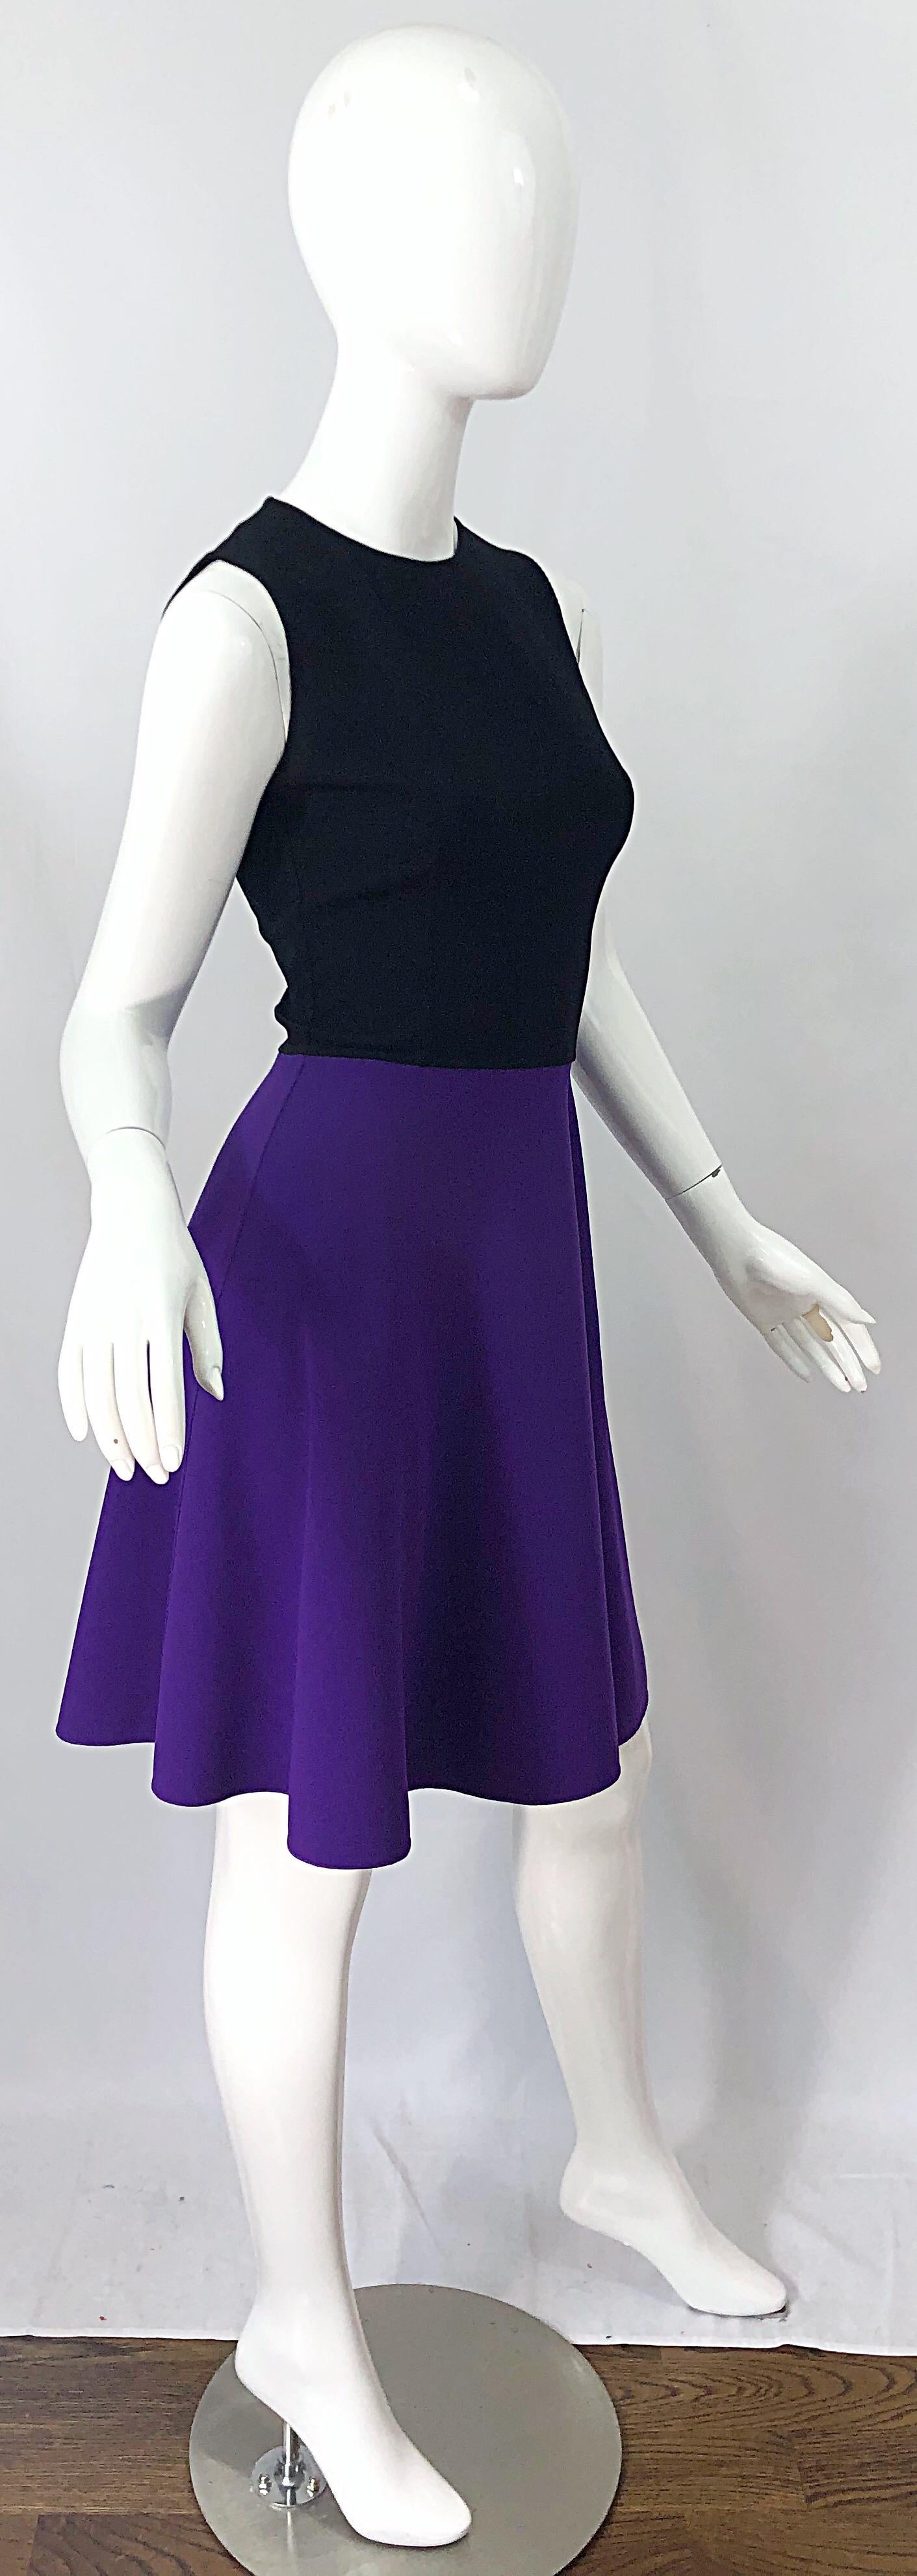 Michael Kors Collection Size 2 / 4 Purple + Black Color Block Sleeveles Dress In Excellent Condition For Sale In San Diego, CA